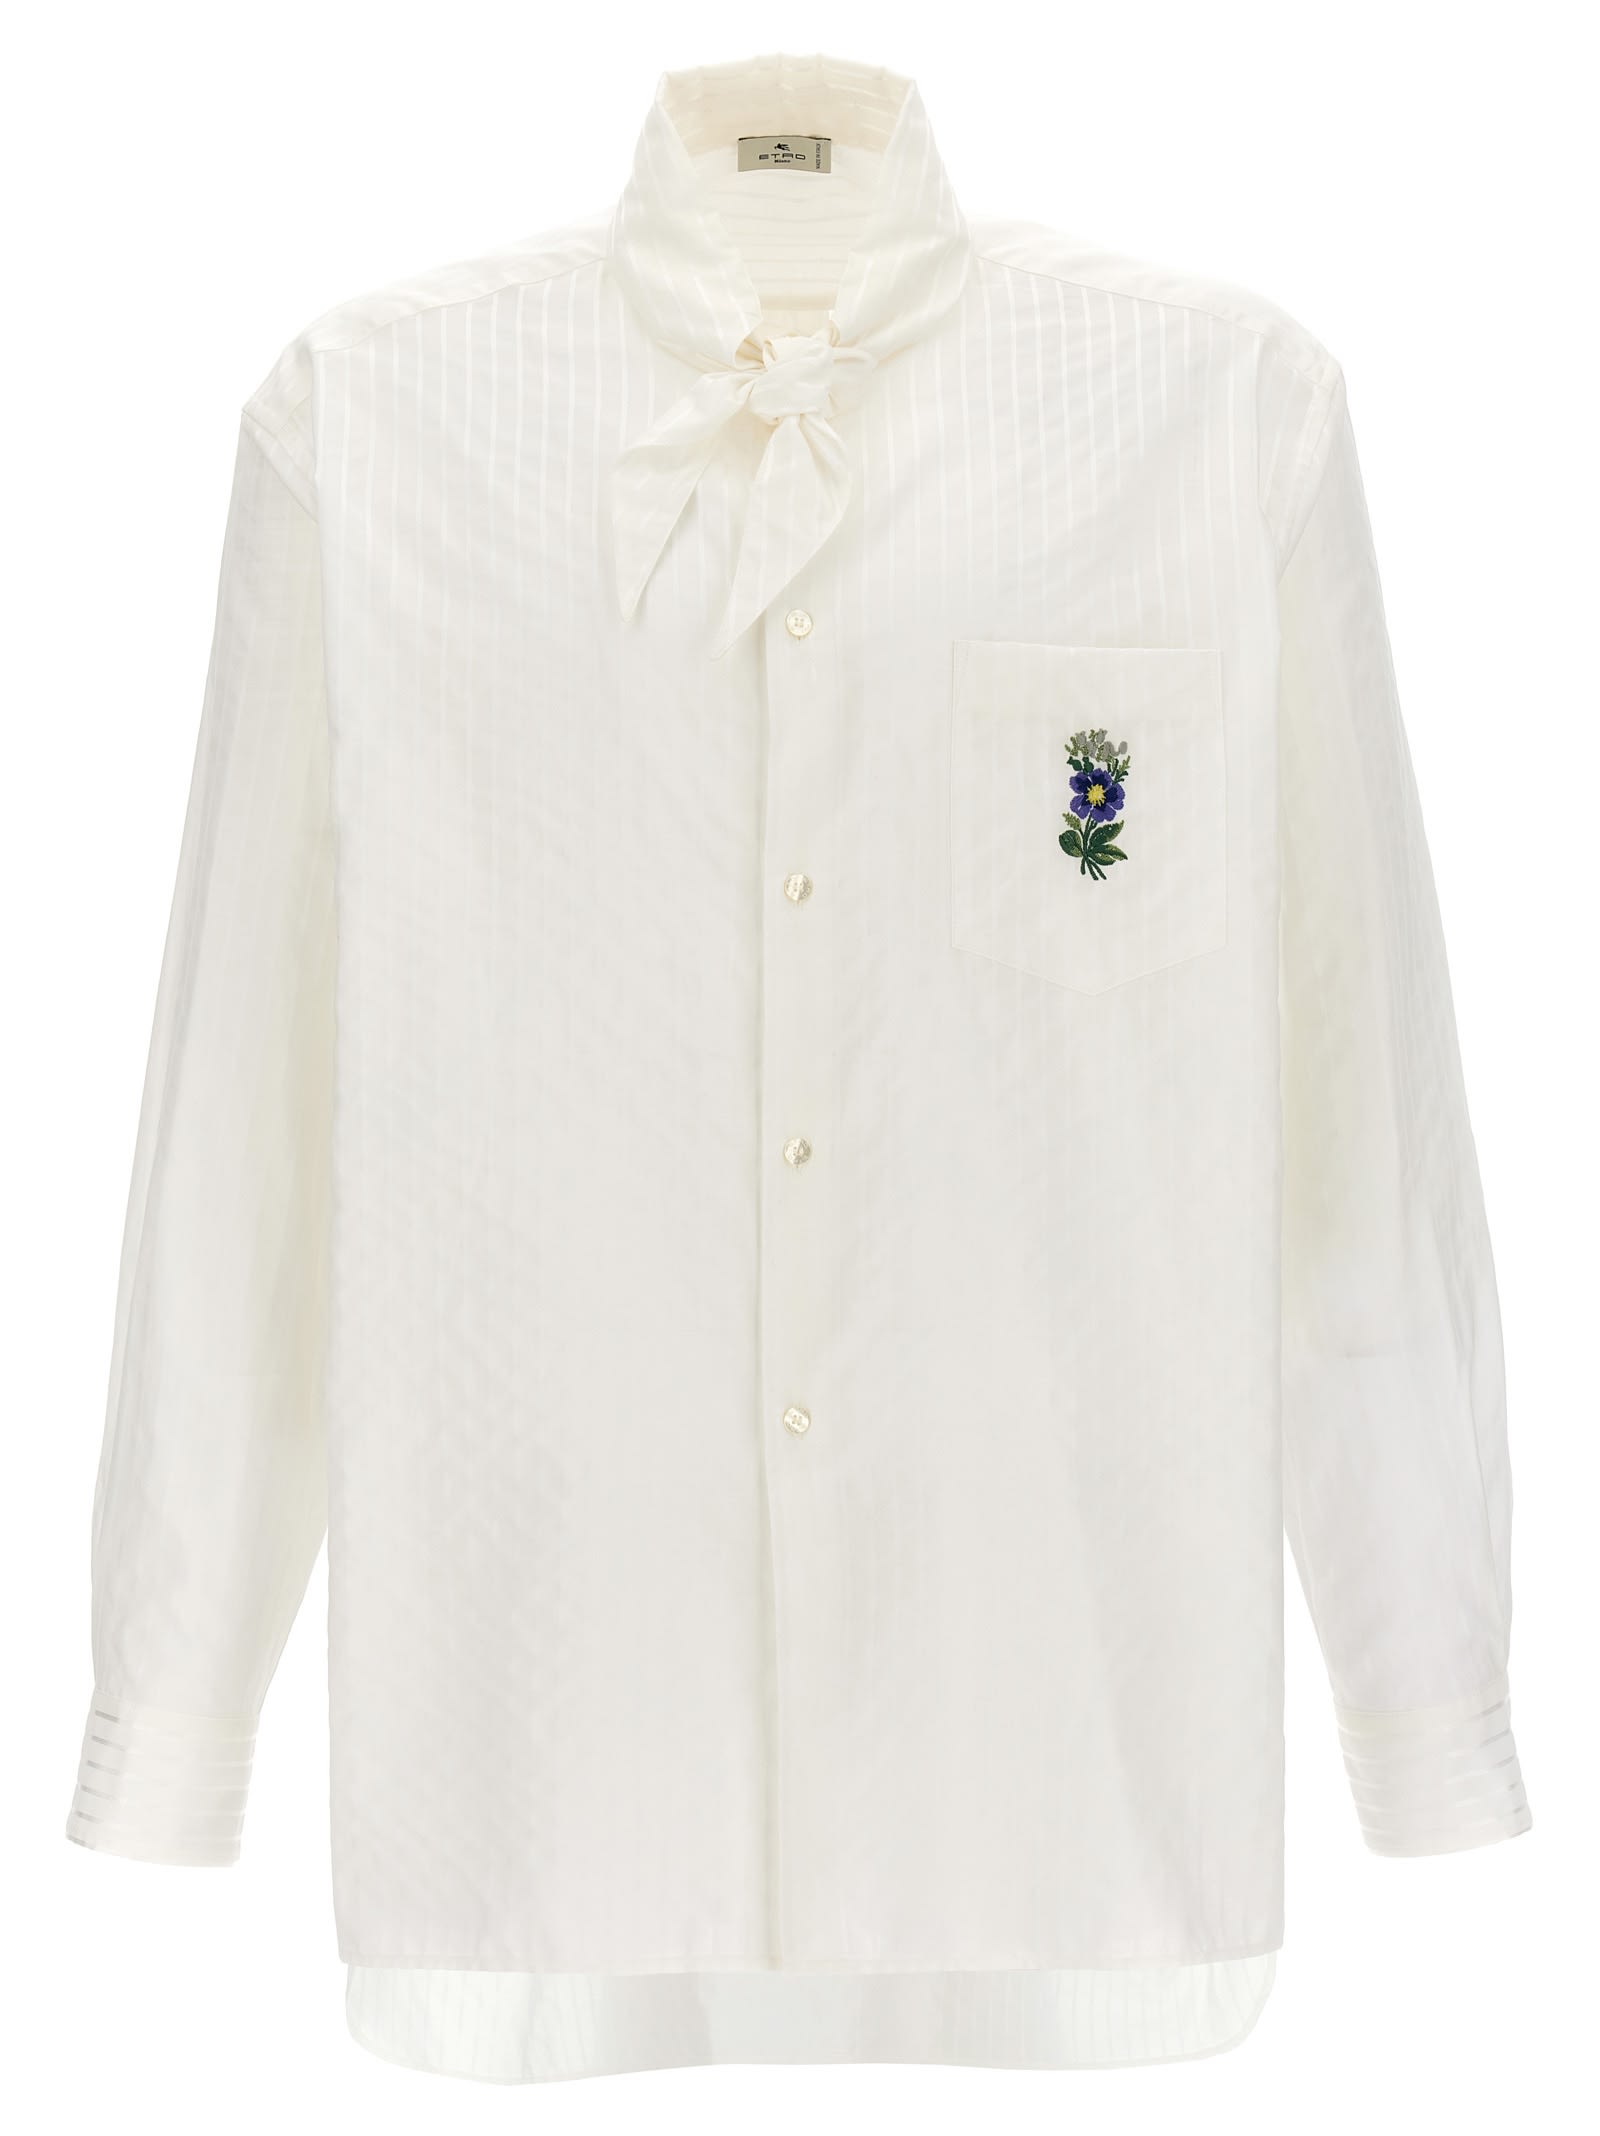 Etro Floral Embroidery Shirt